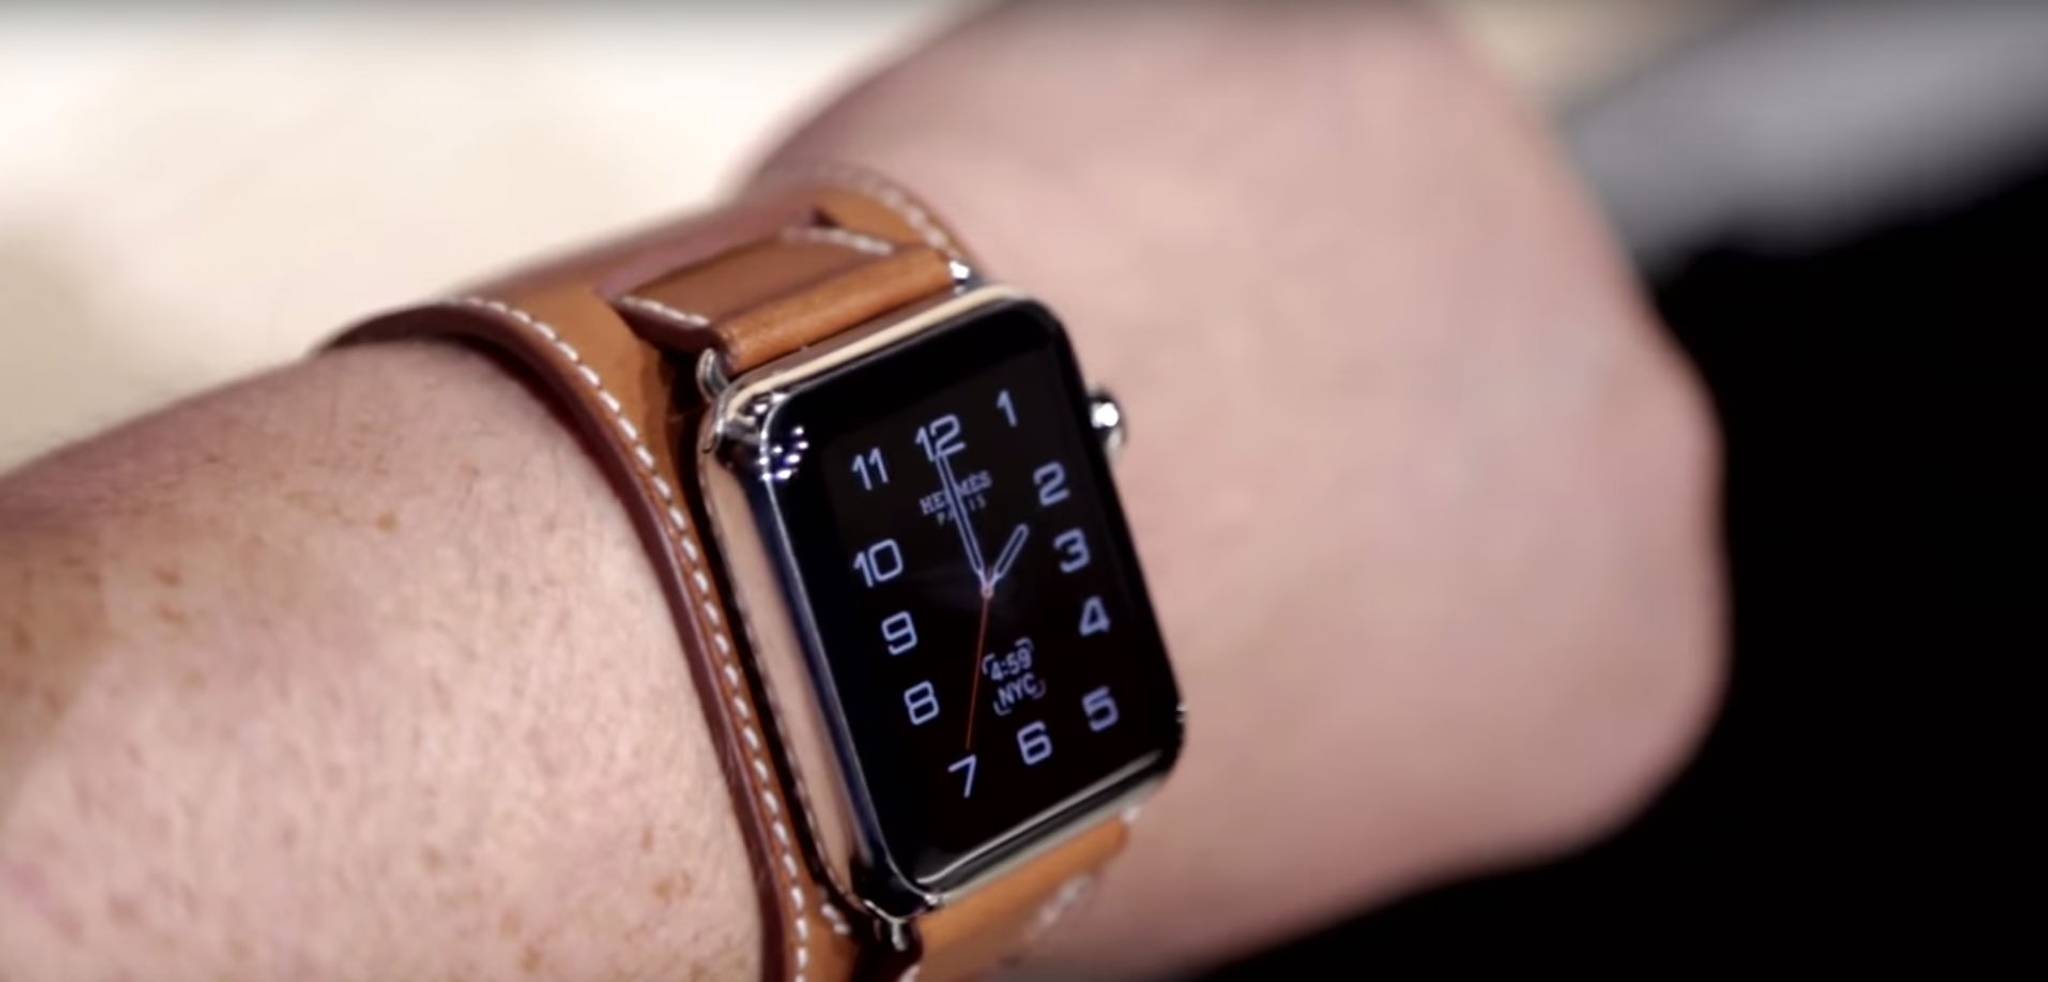 Apple teams up with Hermès for a luxury watch